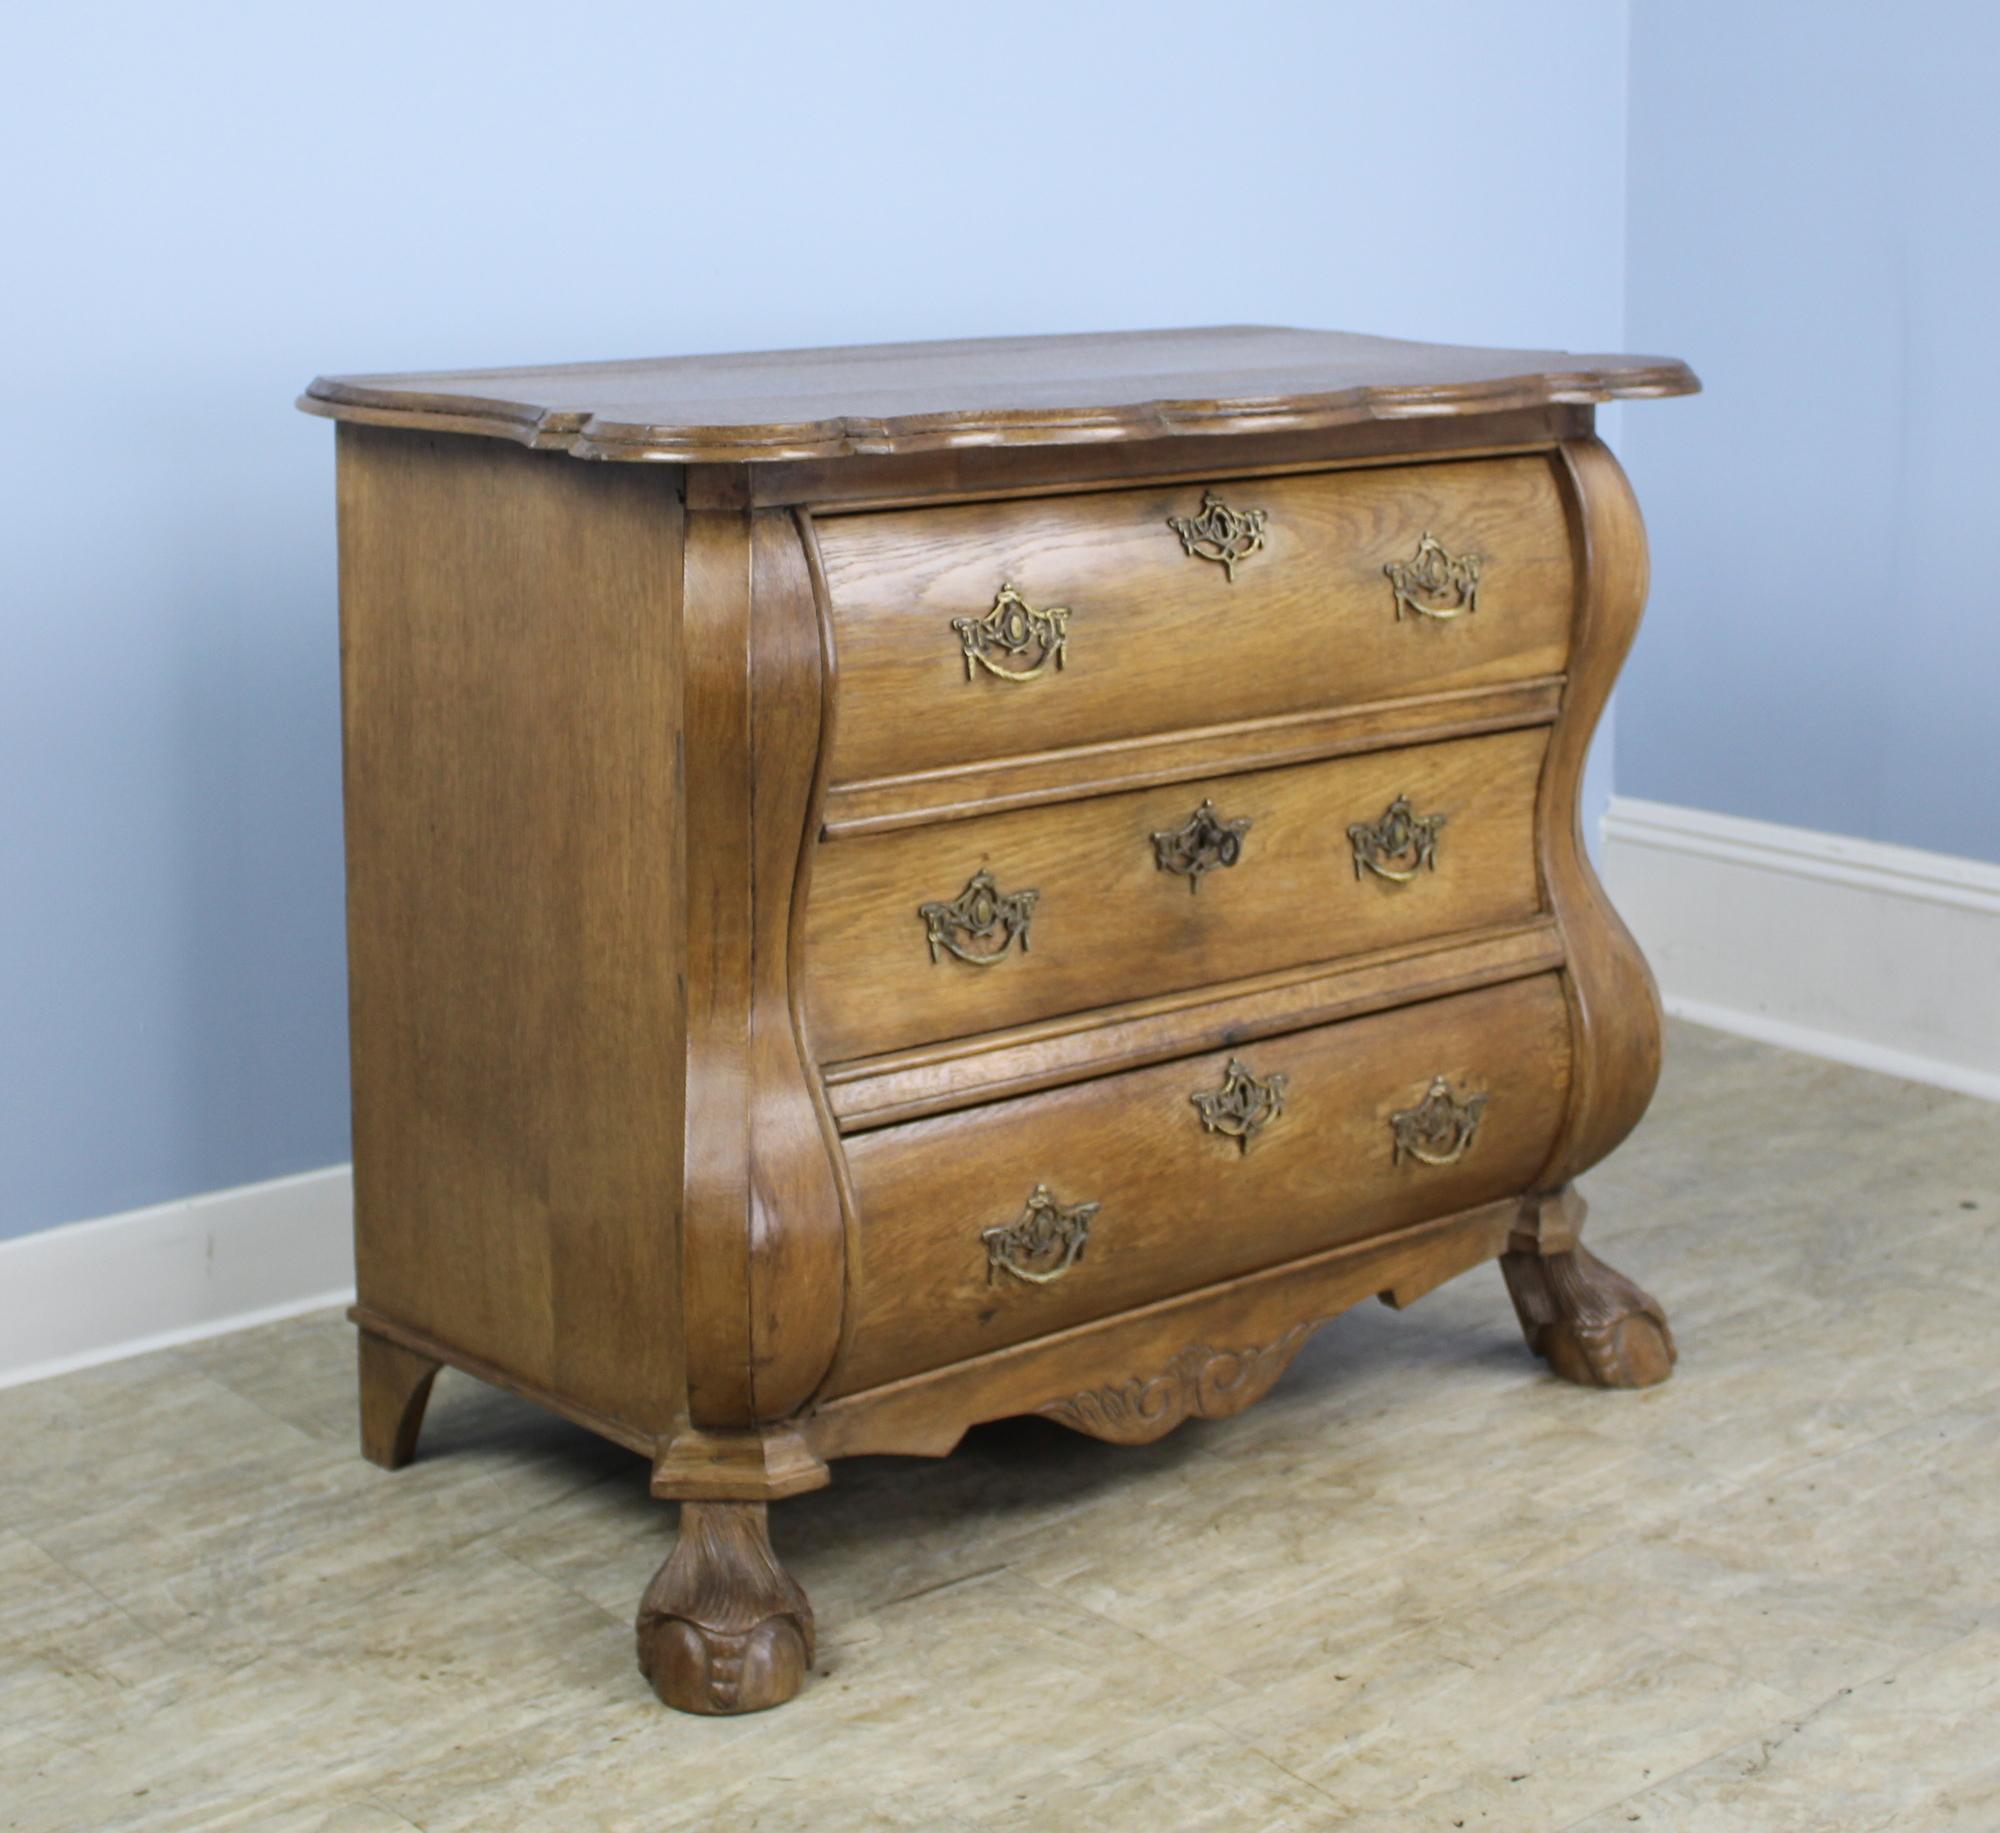 Fabulous early Dutch bombe chest or commode, grand in presence. This four drawer bureau is made of polished oak with a beautiful color and rich patina. Details of note include all original handles, shaped and decoratively carved apron on the front,